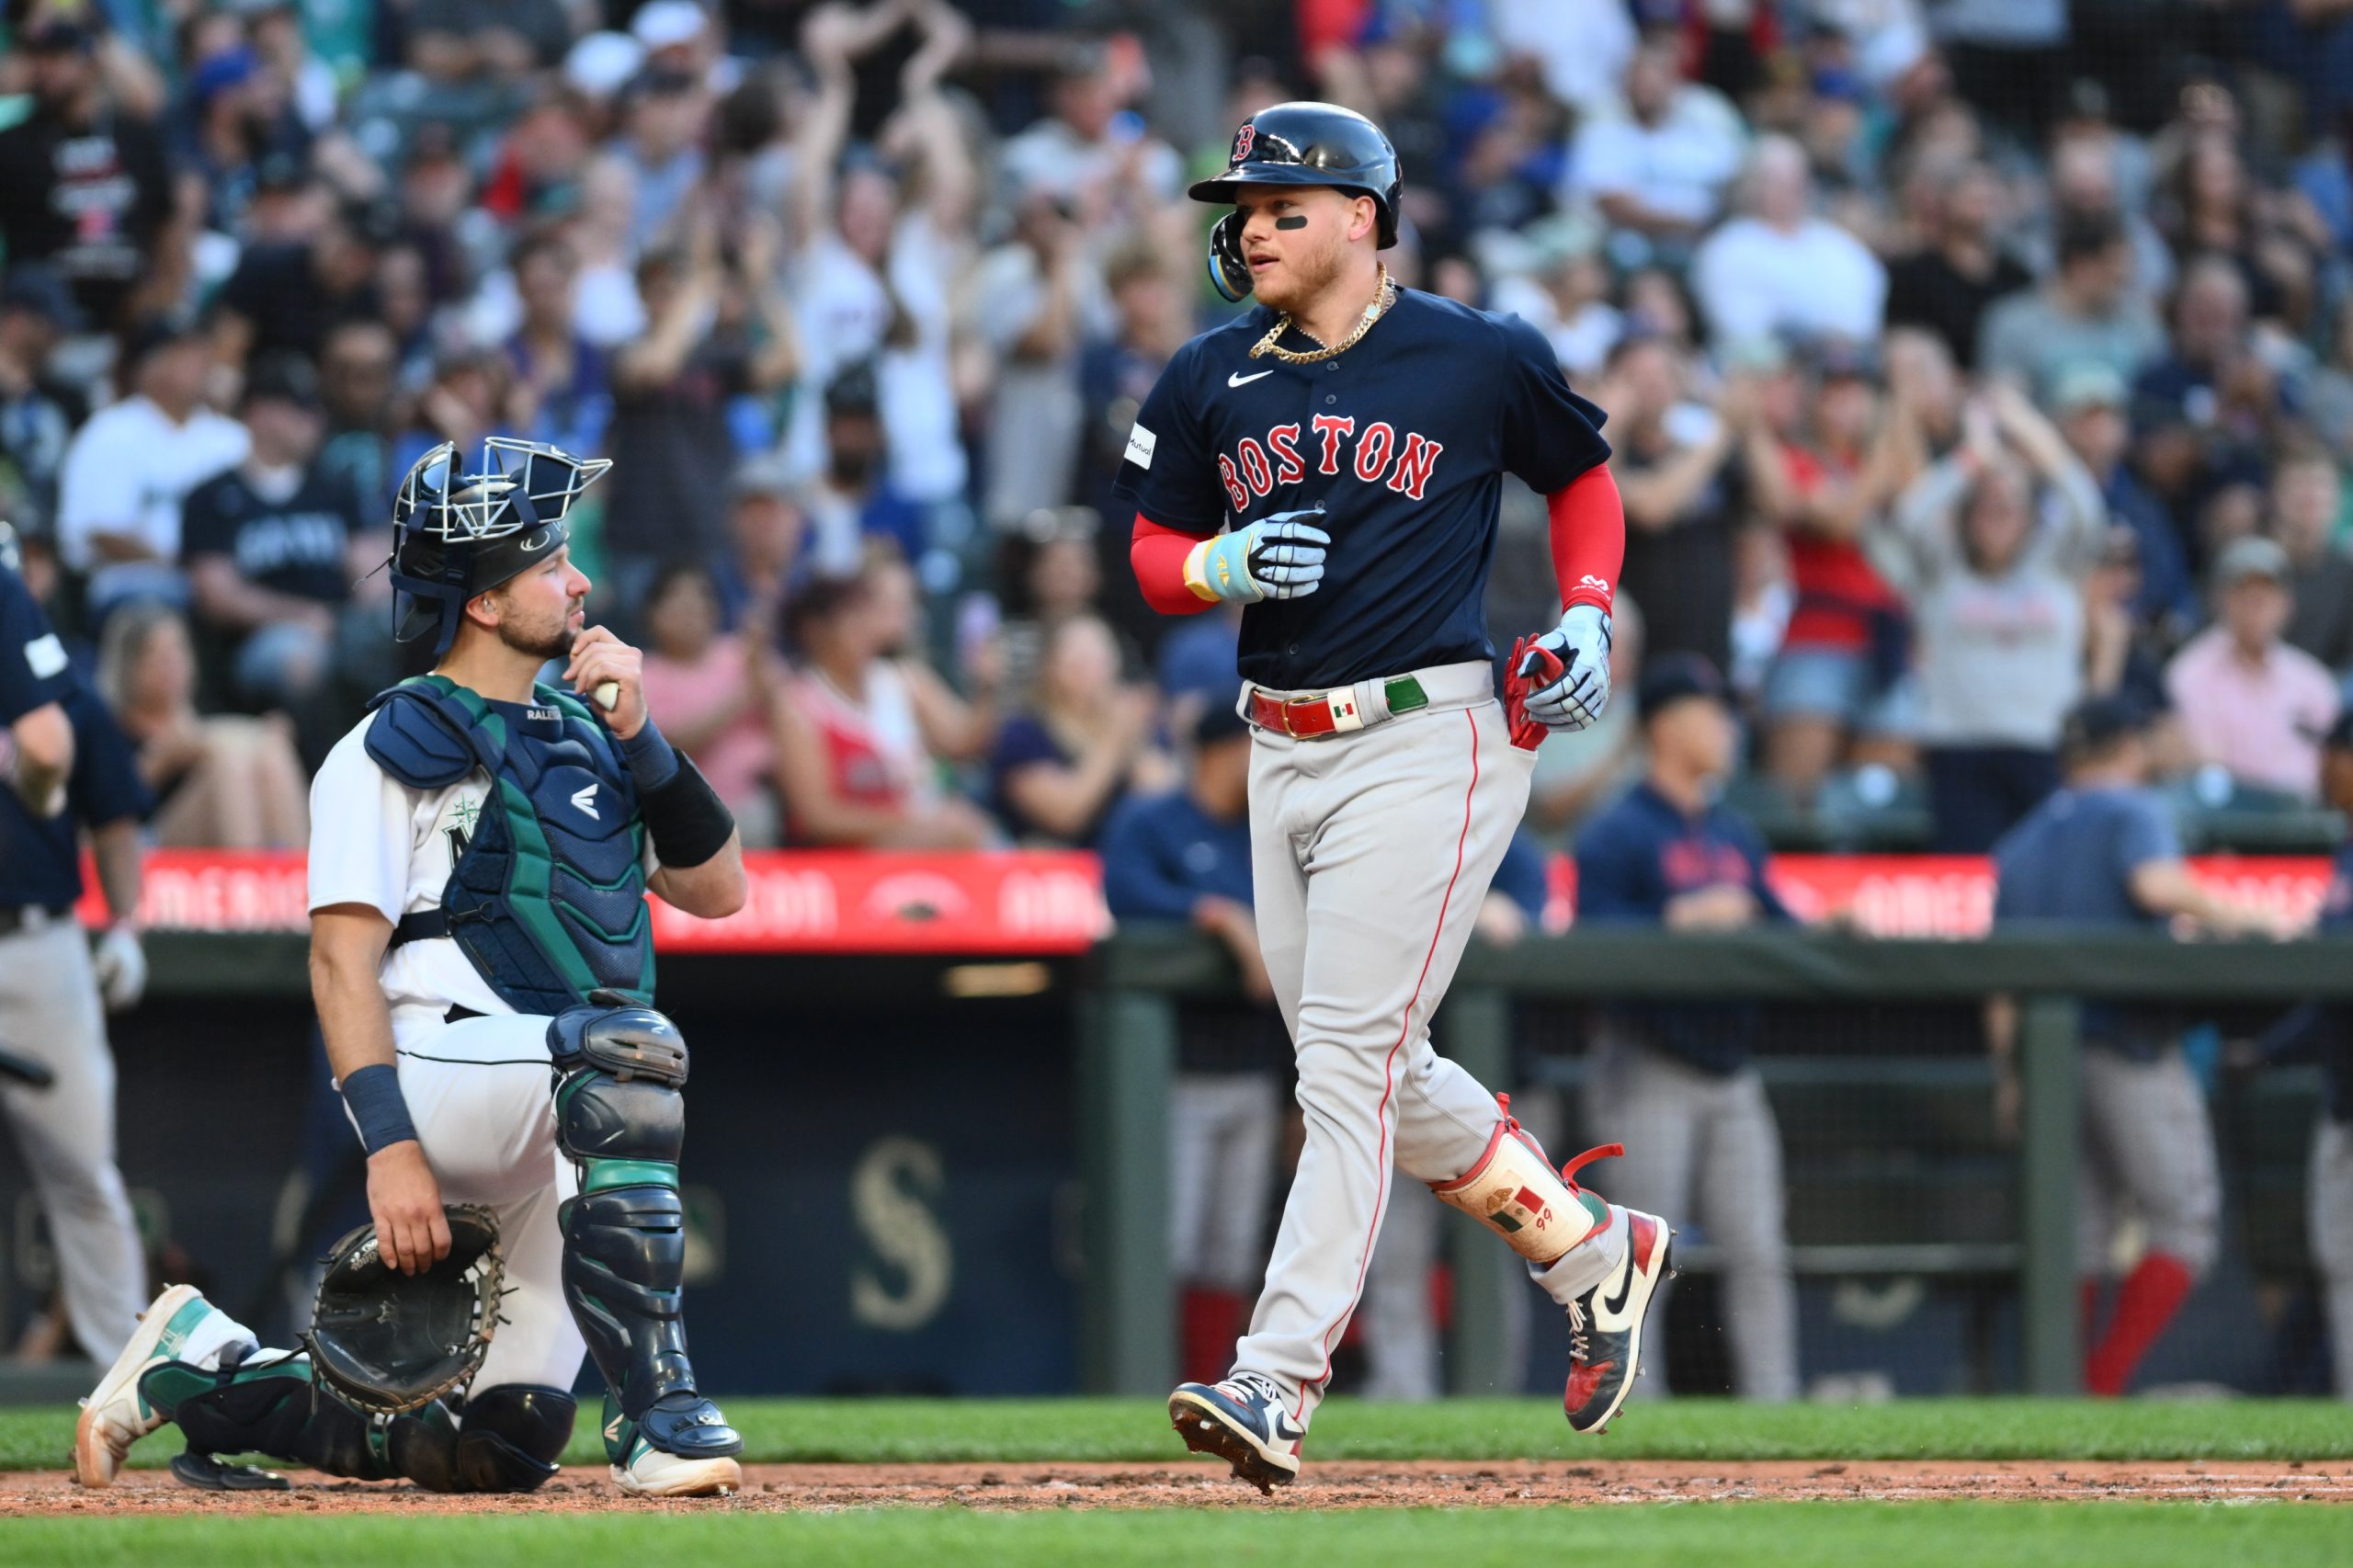 Alex Verdugo comes through with game-winning RBI double as Red Sox